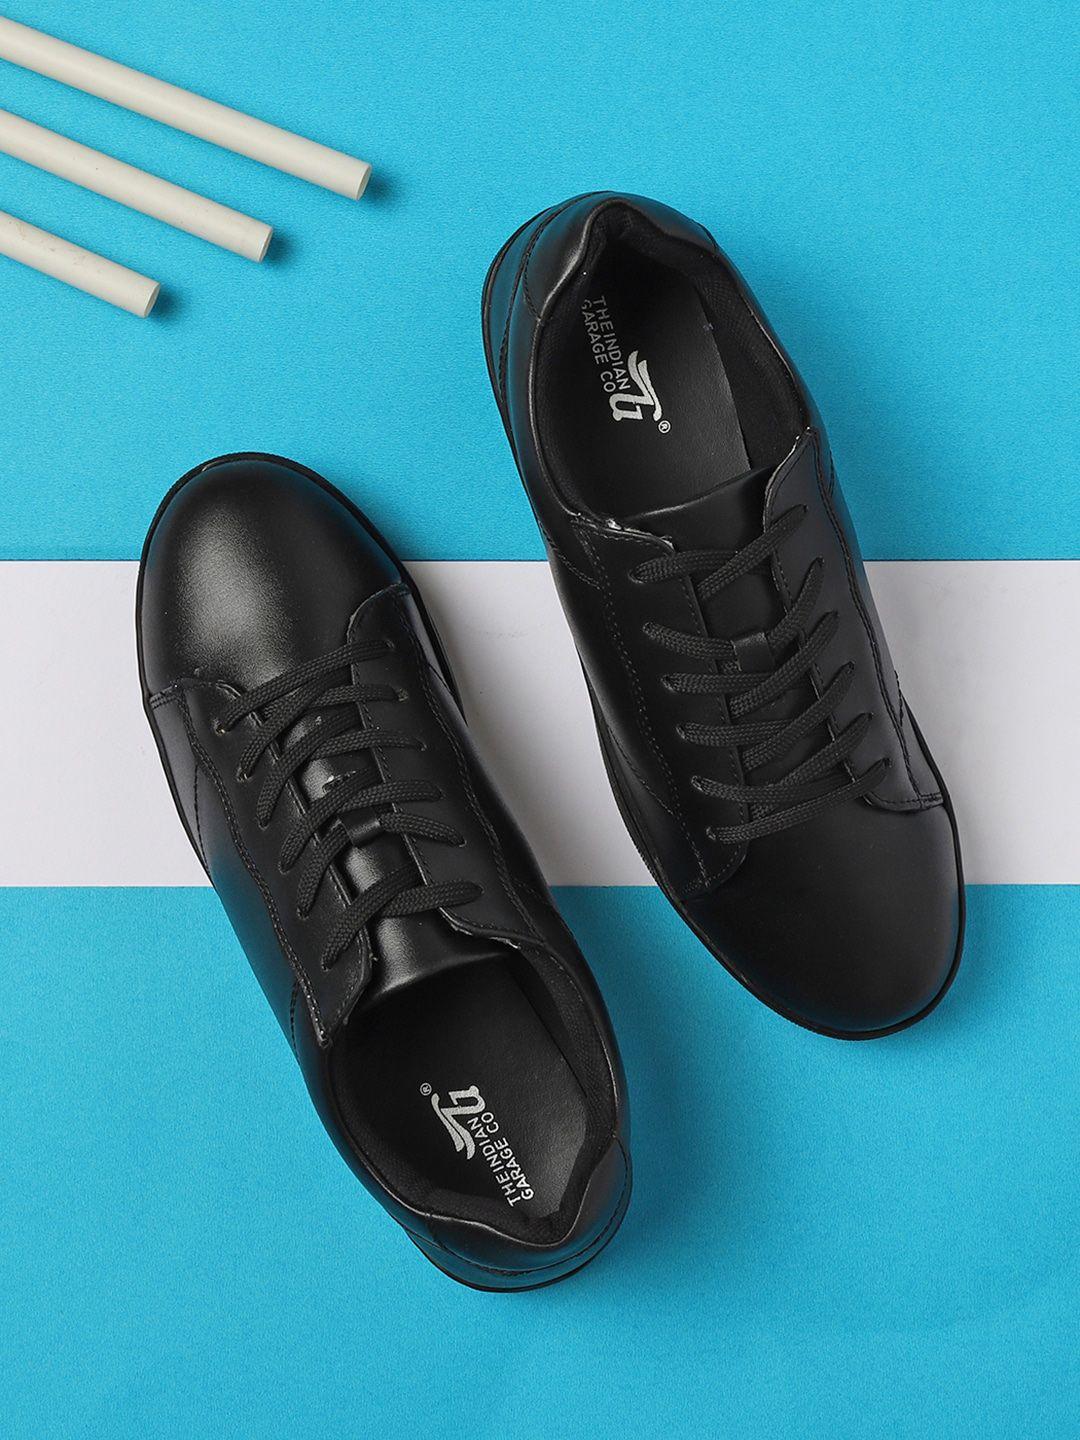 the indian garage co men lace-up sneakers